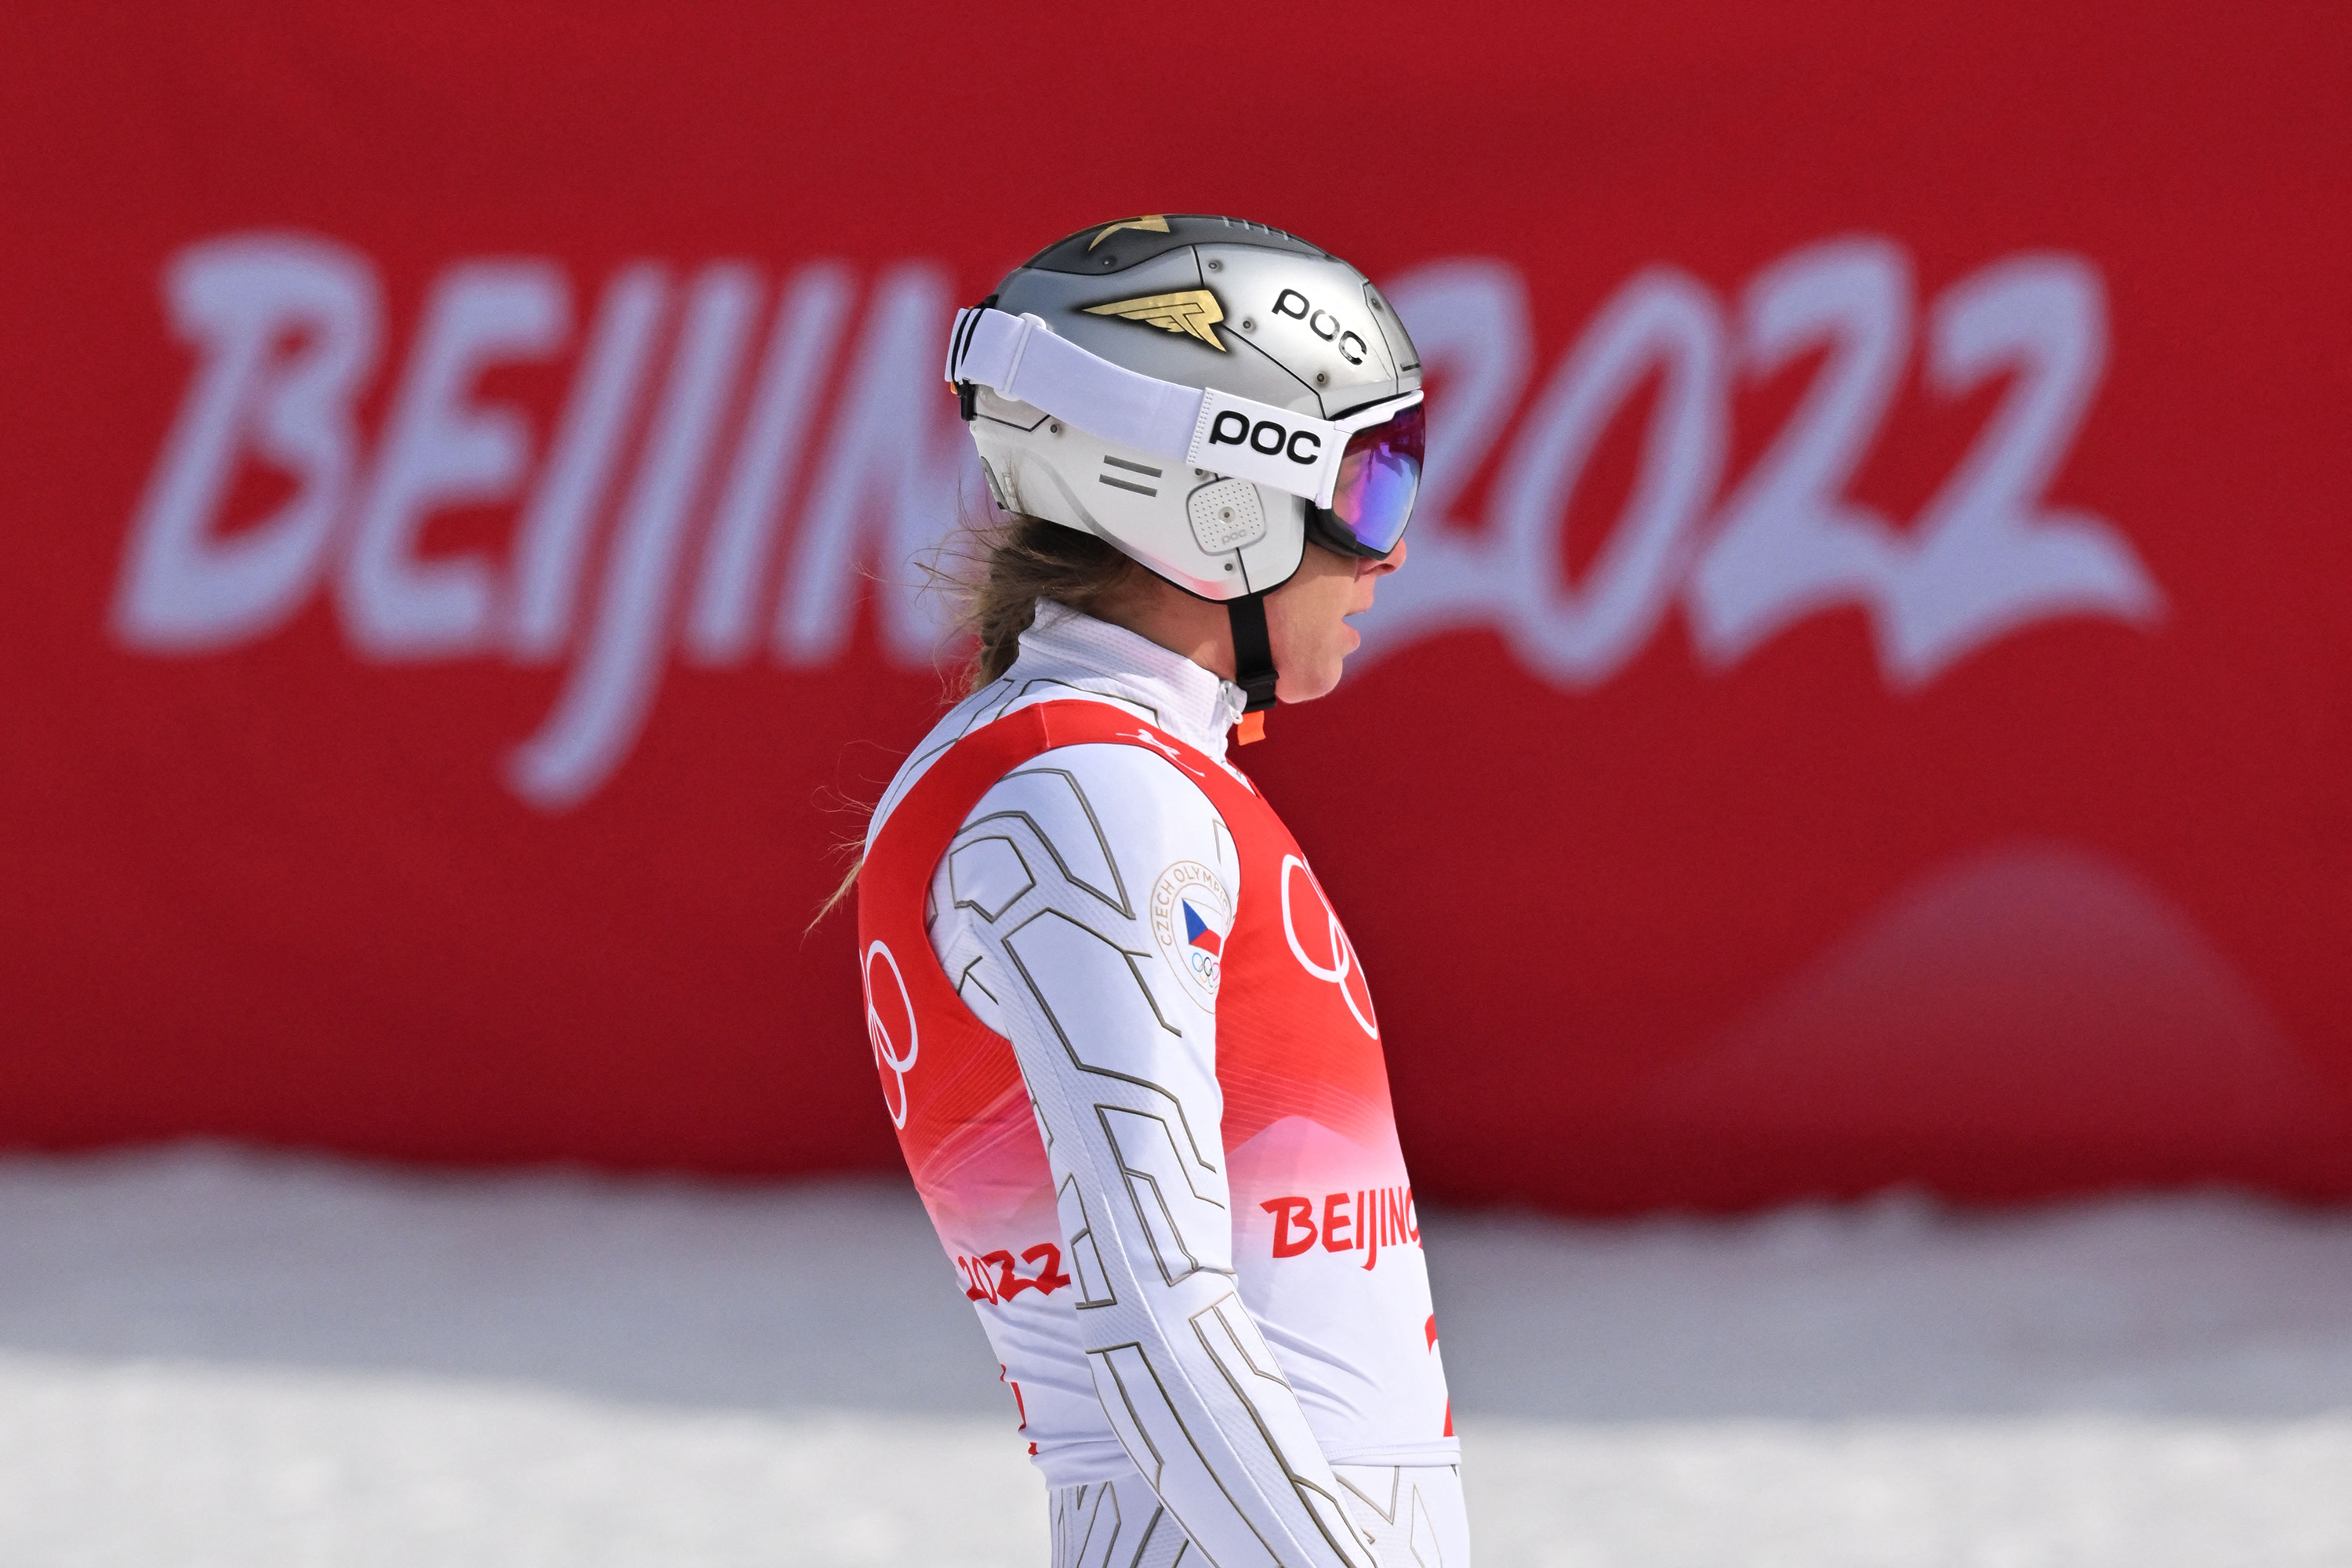 Czech Republic's Ester Ledecka competes in the alpine skiing women's super-G final on Friday.